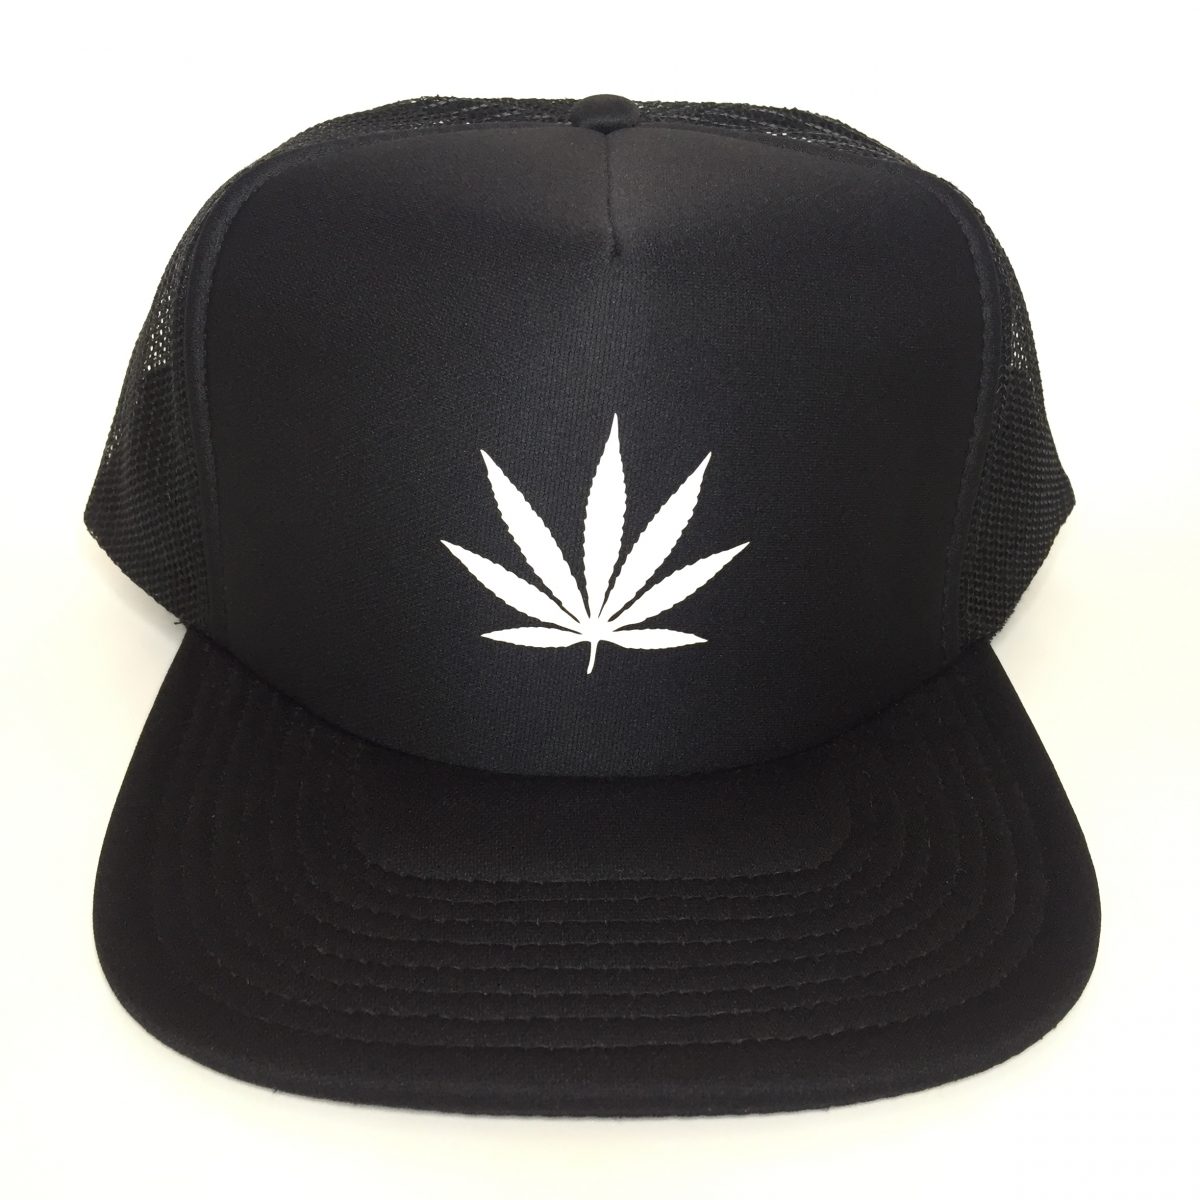 Weed Leaf Trucker Hat White on Black Front View